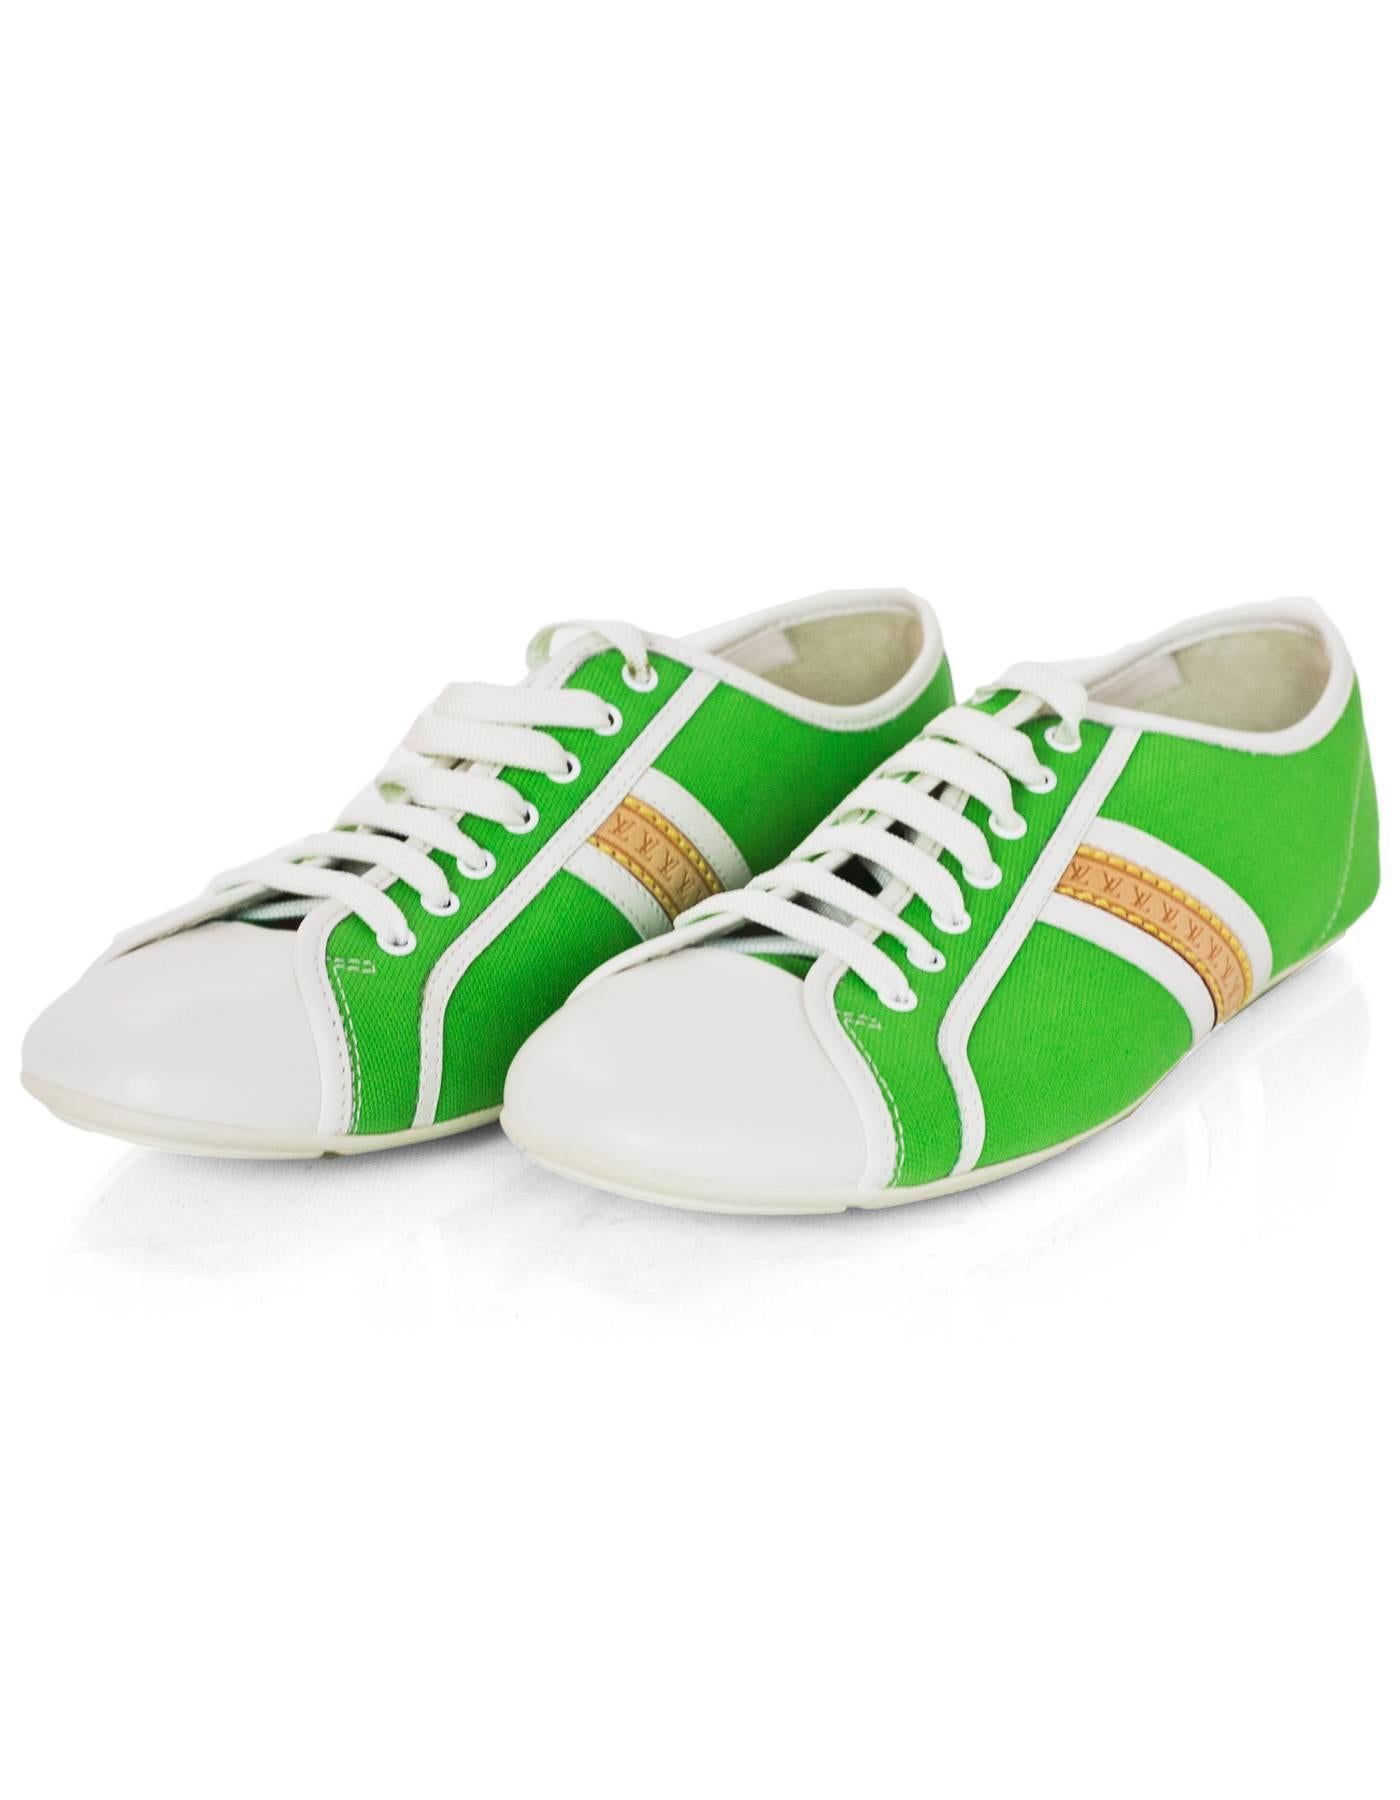 Louis Vuitton White Leather & Green Canvas Sneakers Sz 38 NEW

Color: White, Green
Closure/Opening: Lace tie closure
Sole Stamp: LV 
Overall Condition: Excellent pre-owned condition - NEW
Marked Size: 38
Heel Height: .25